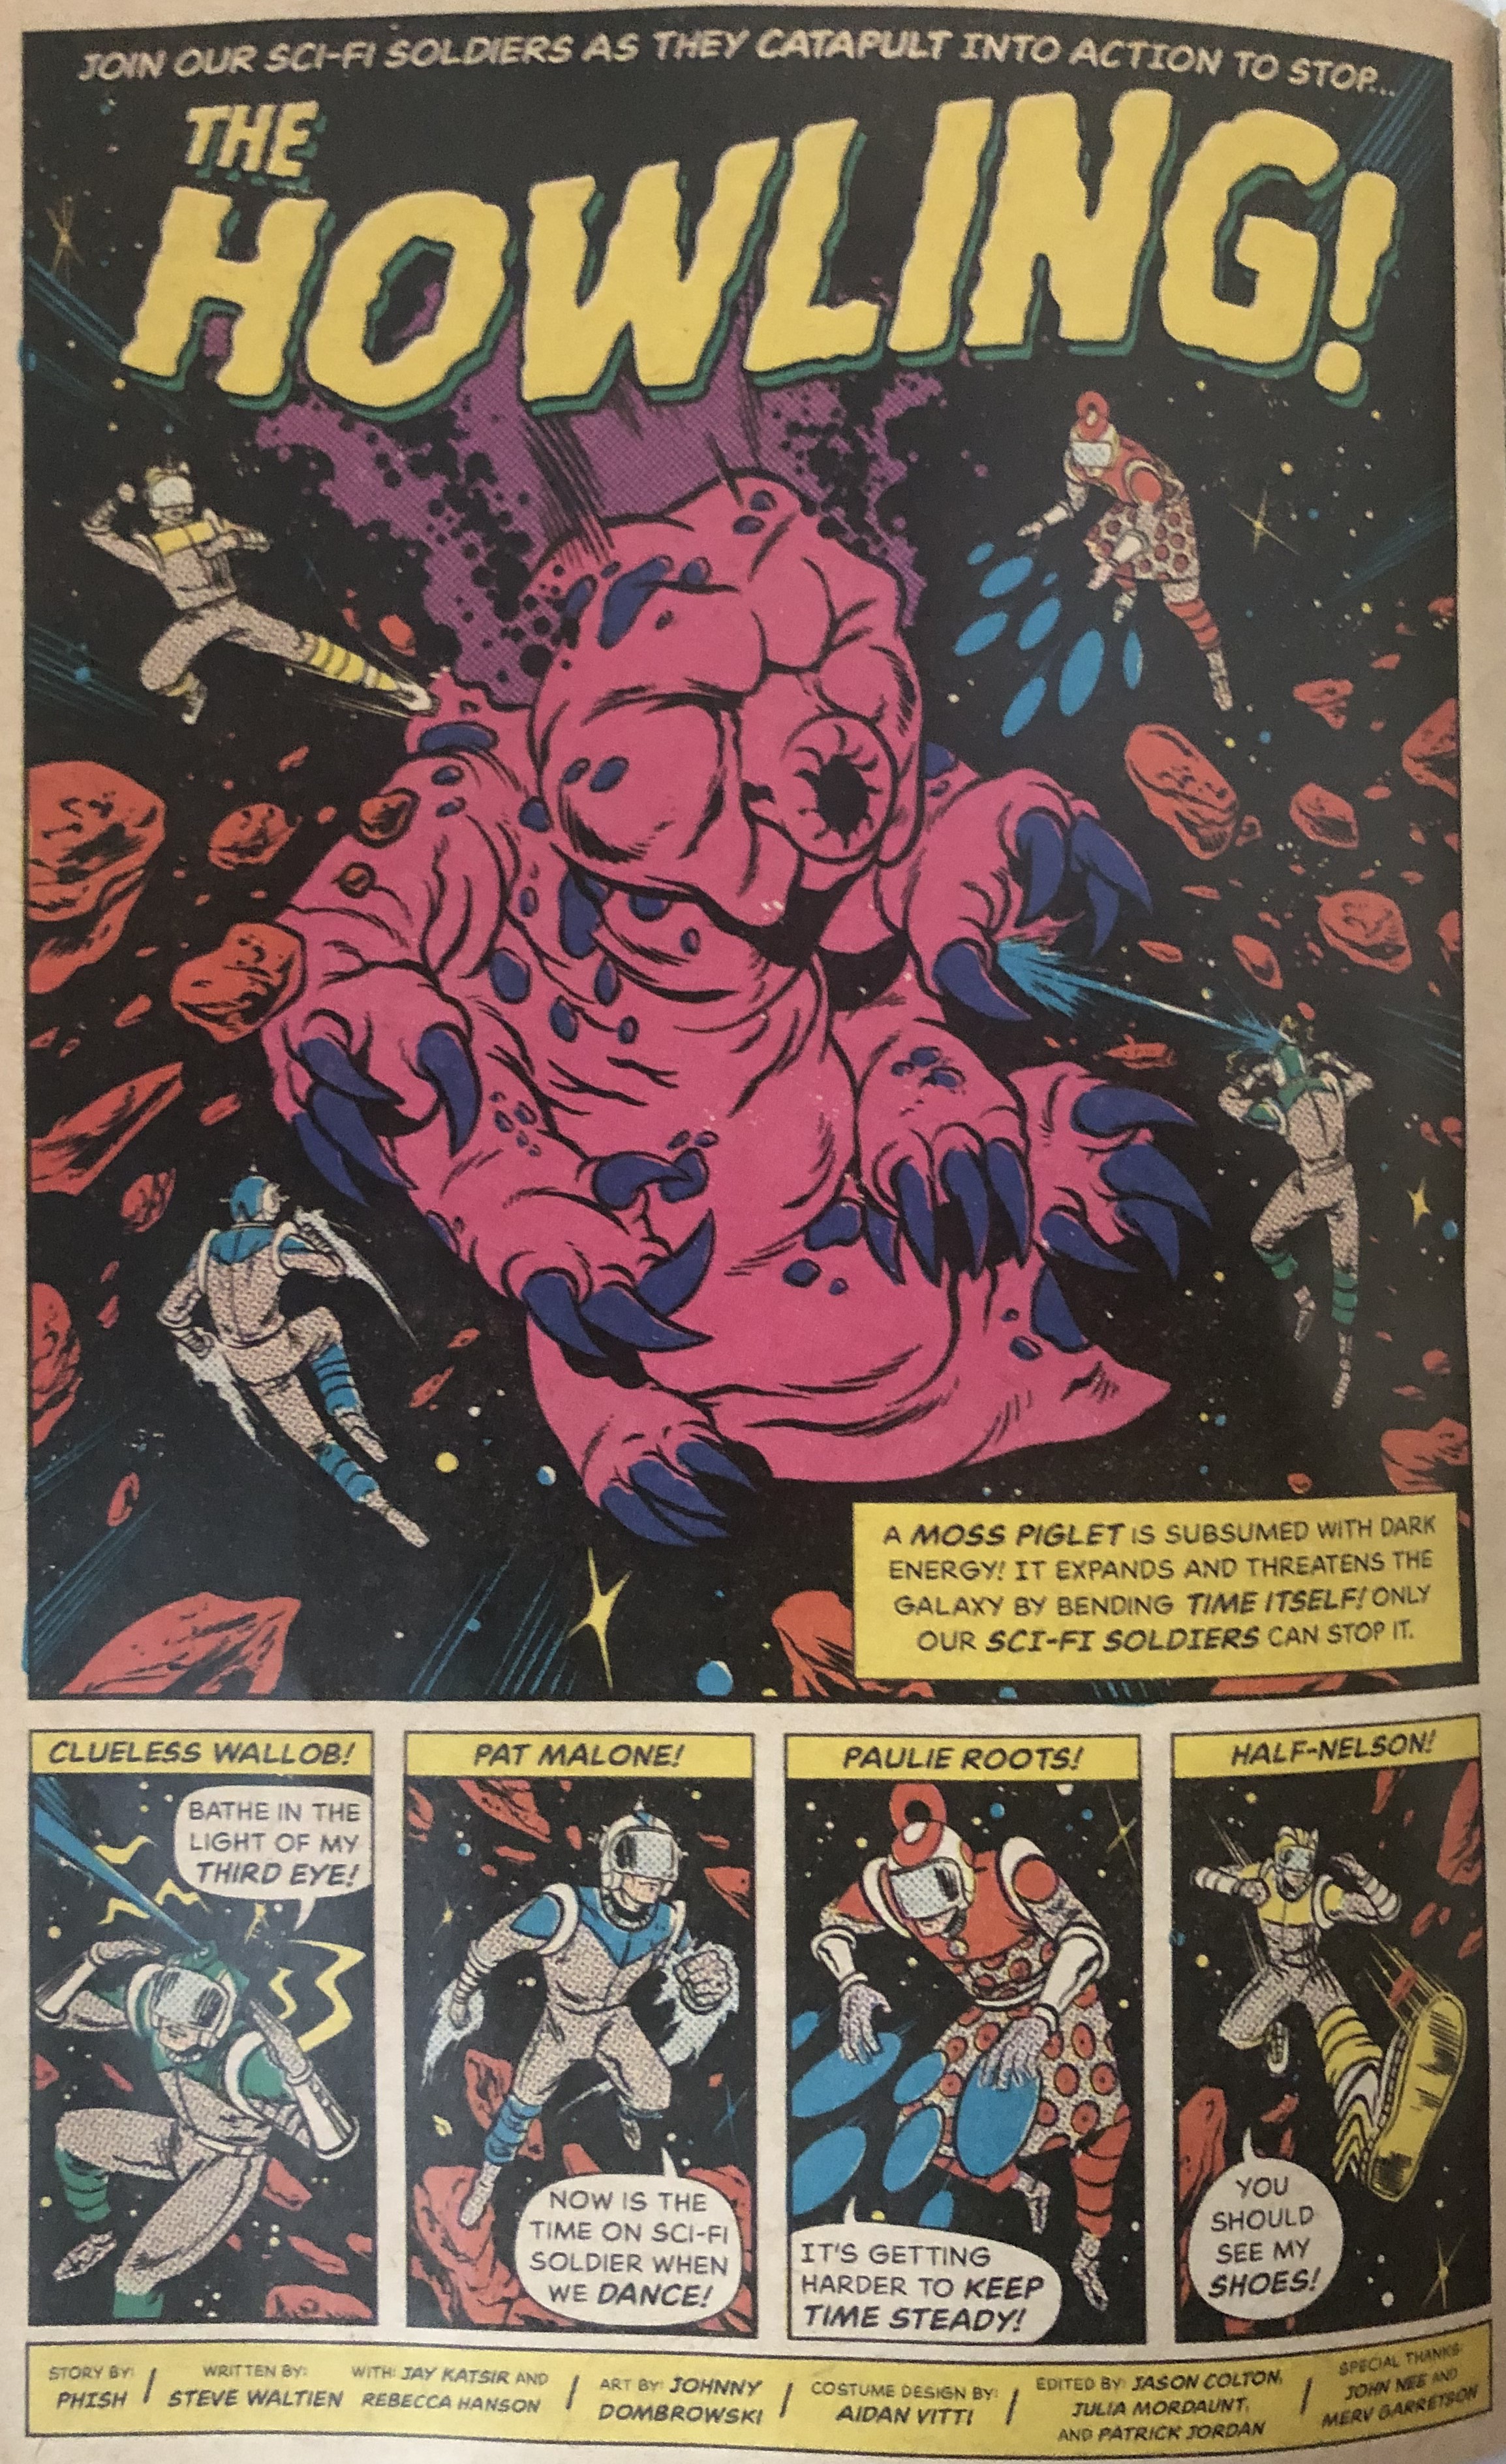 (c) 2021 PHISH (a page from the Sci Fi Soldier comic)